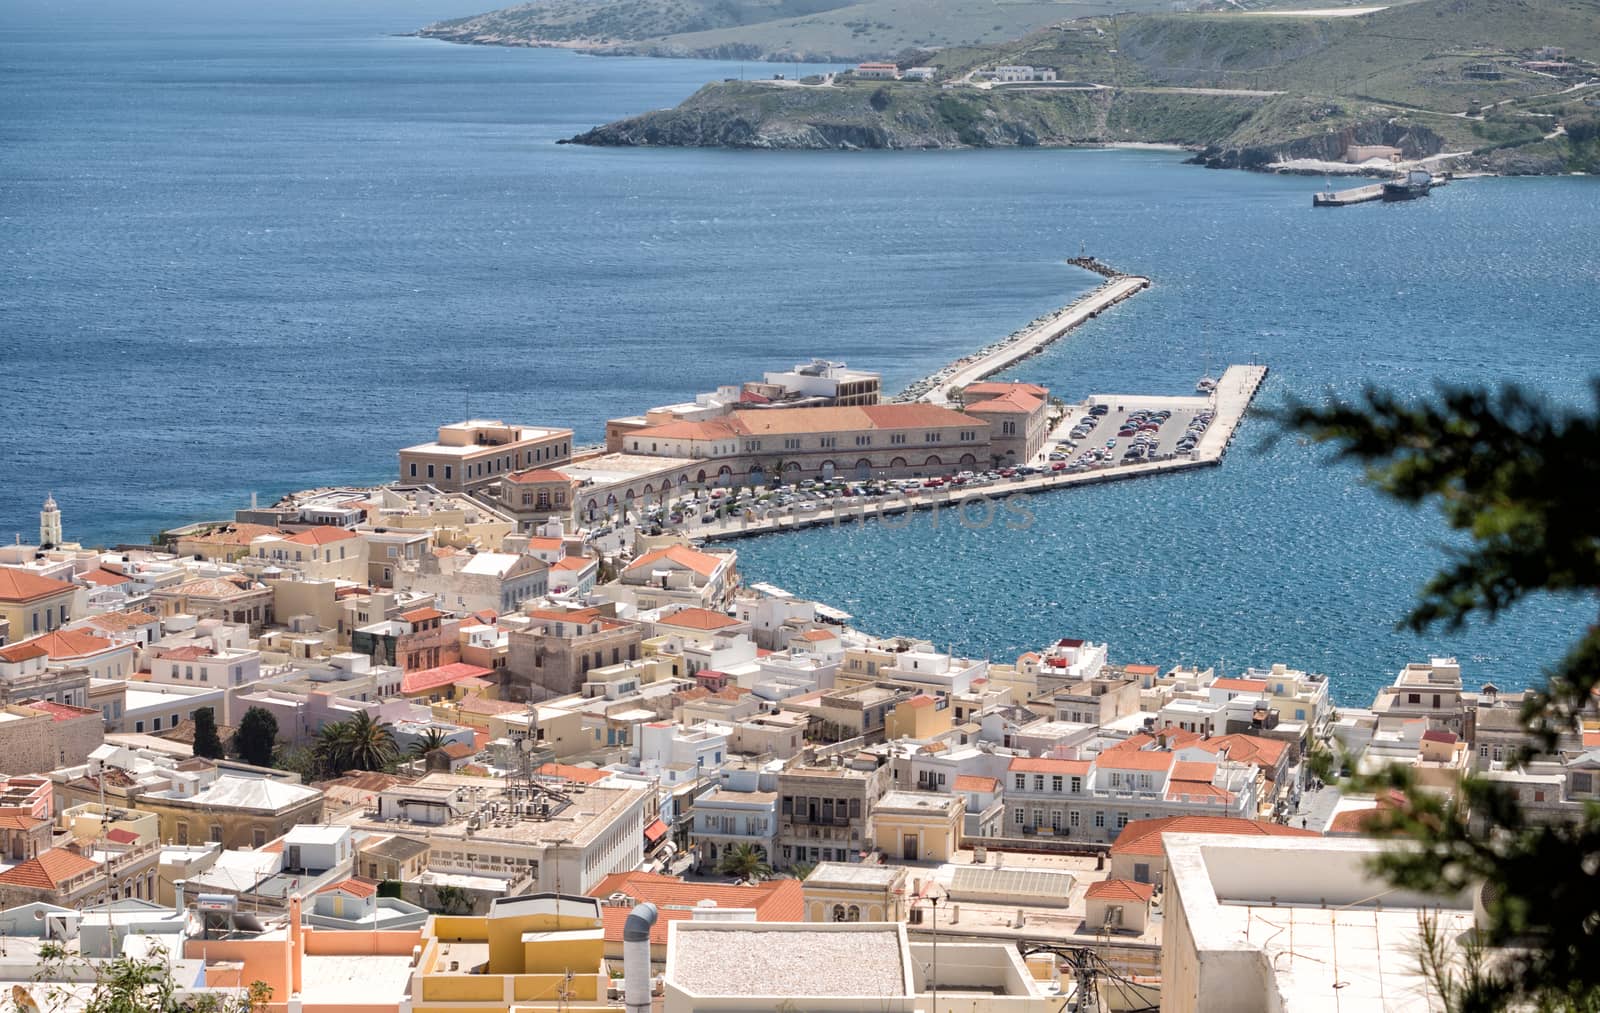 View of Syros town with beautiful buildings and houses in a sunny day